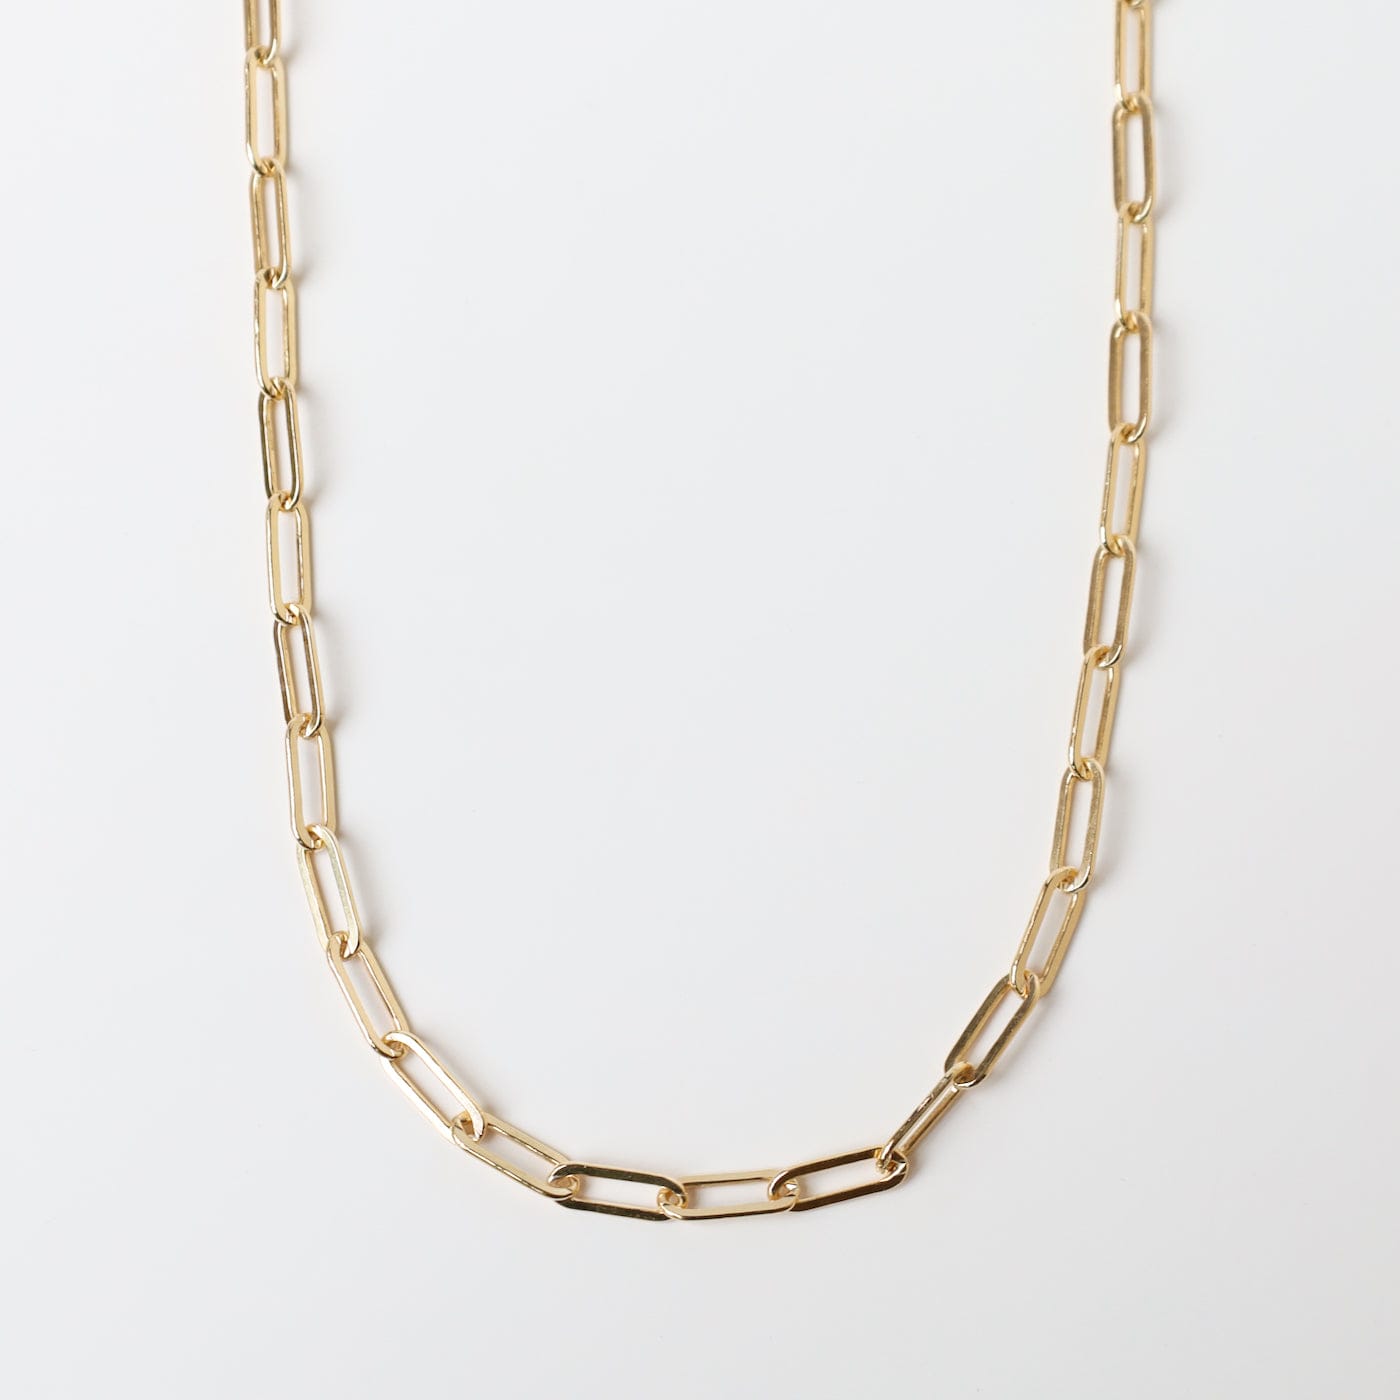 NKL-GF 20" Gold Filled Flat Drawn Cable Chain